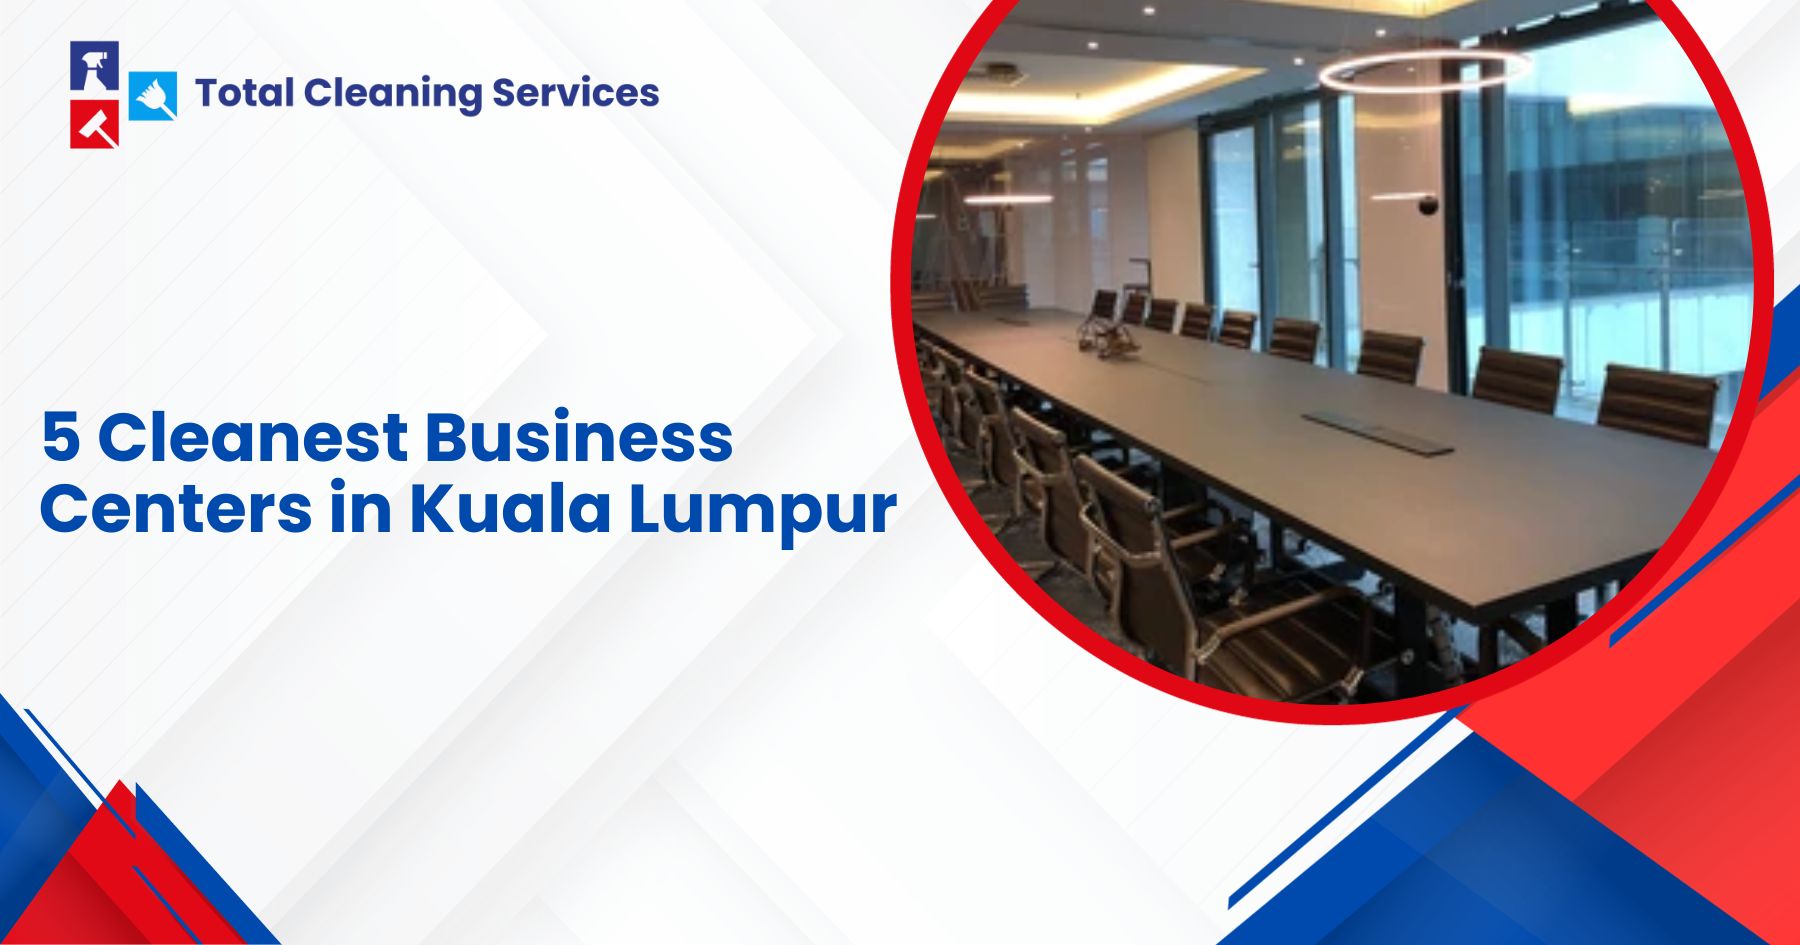 5 Cleanest Business Centers in Kuala Lumpur